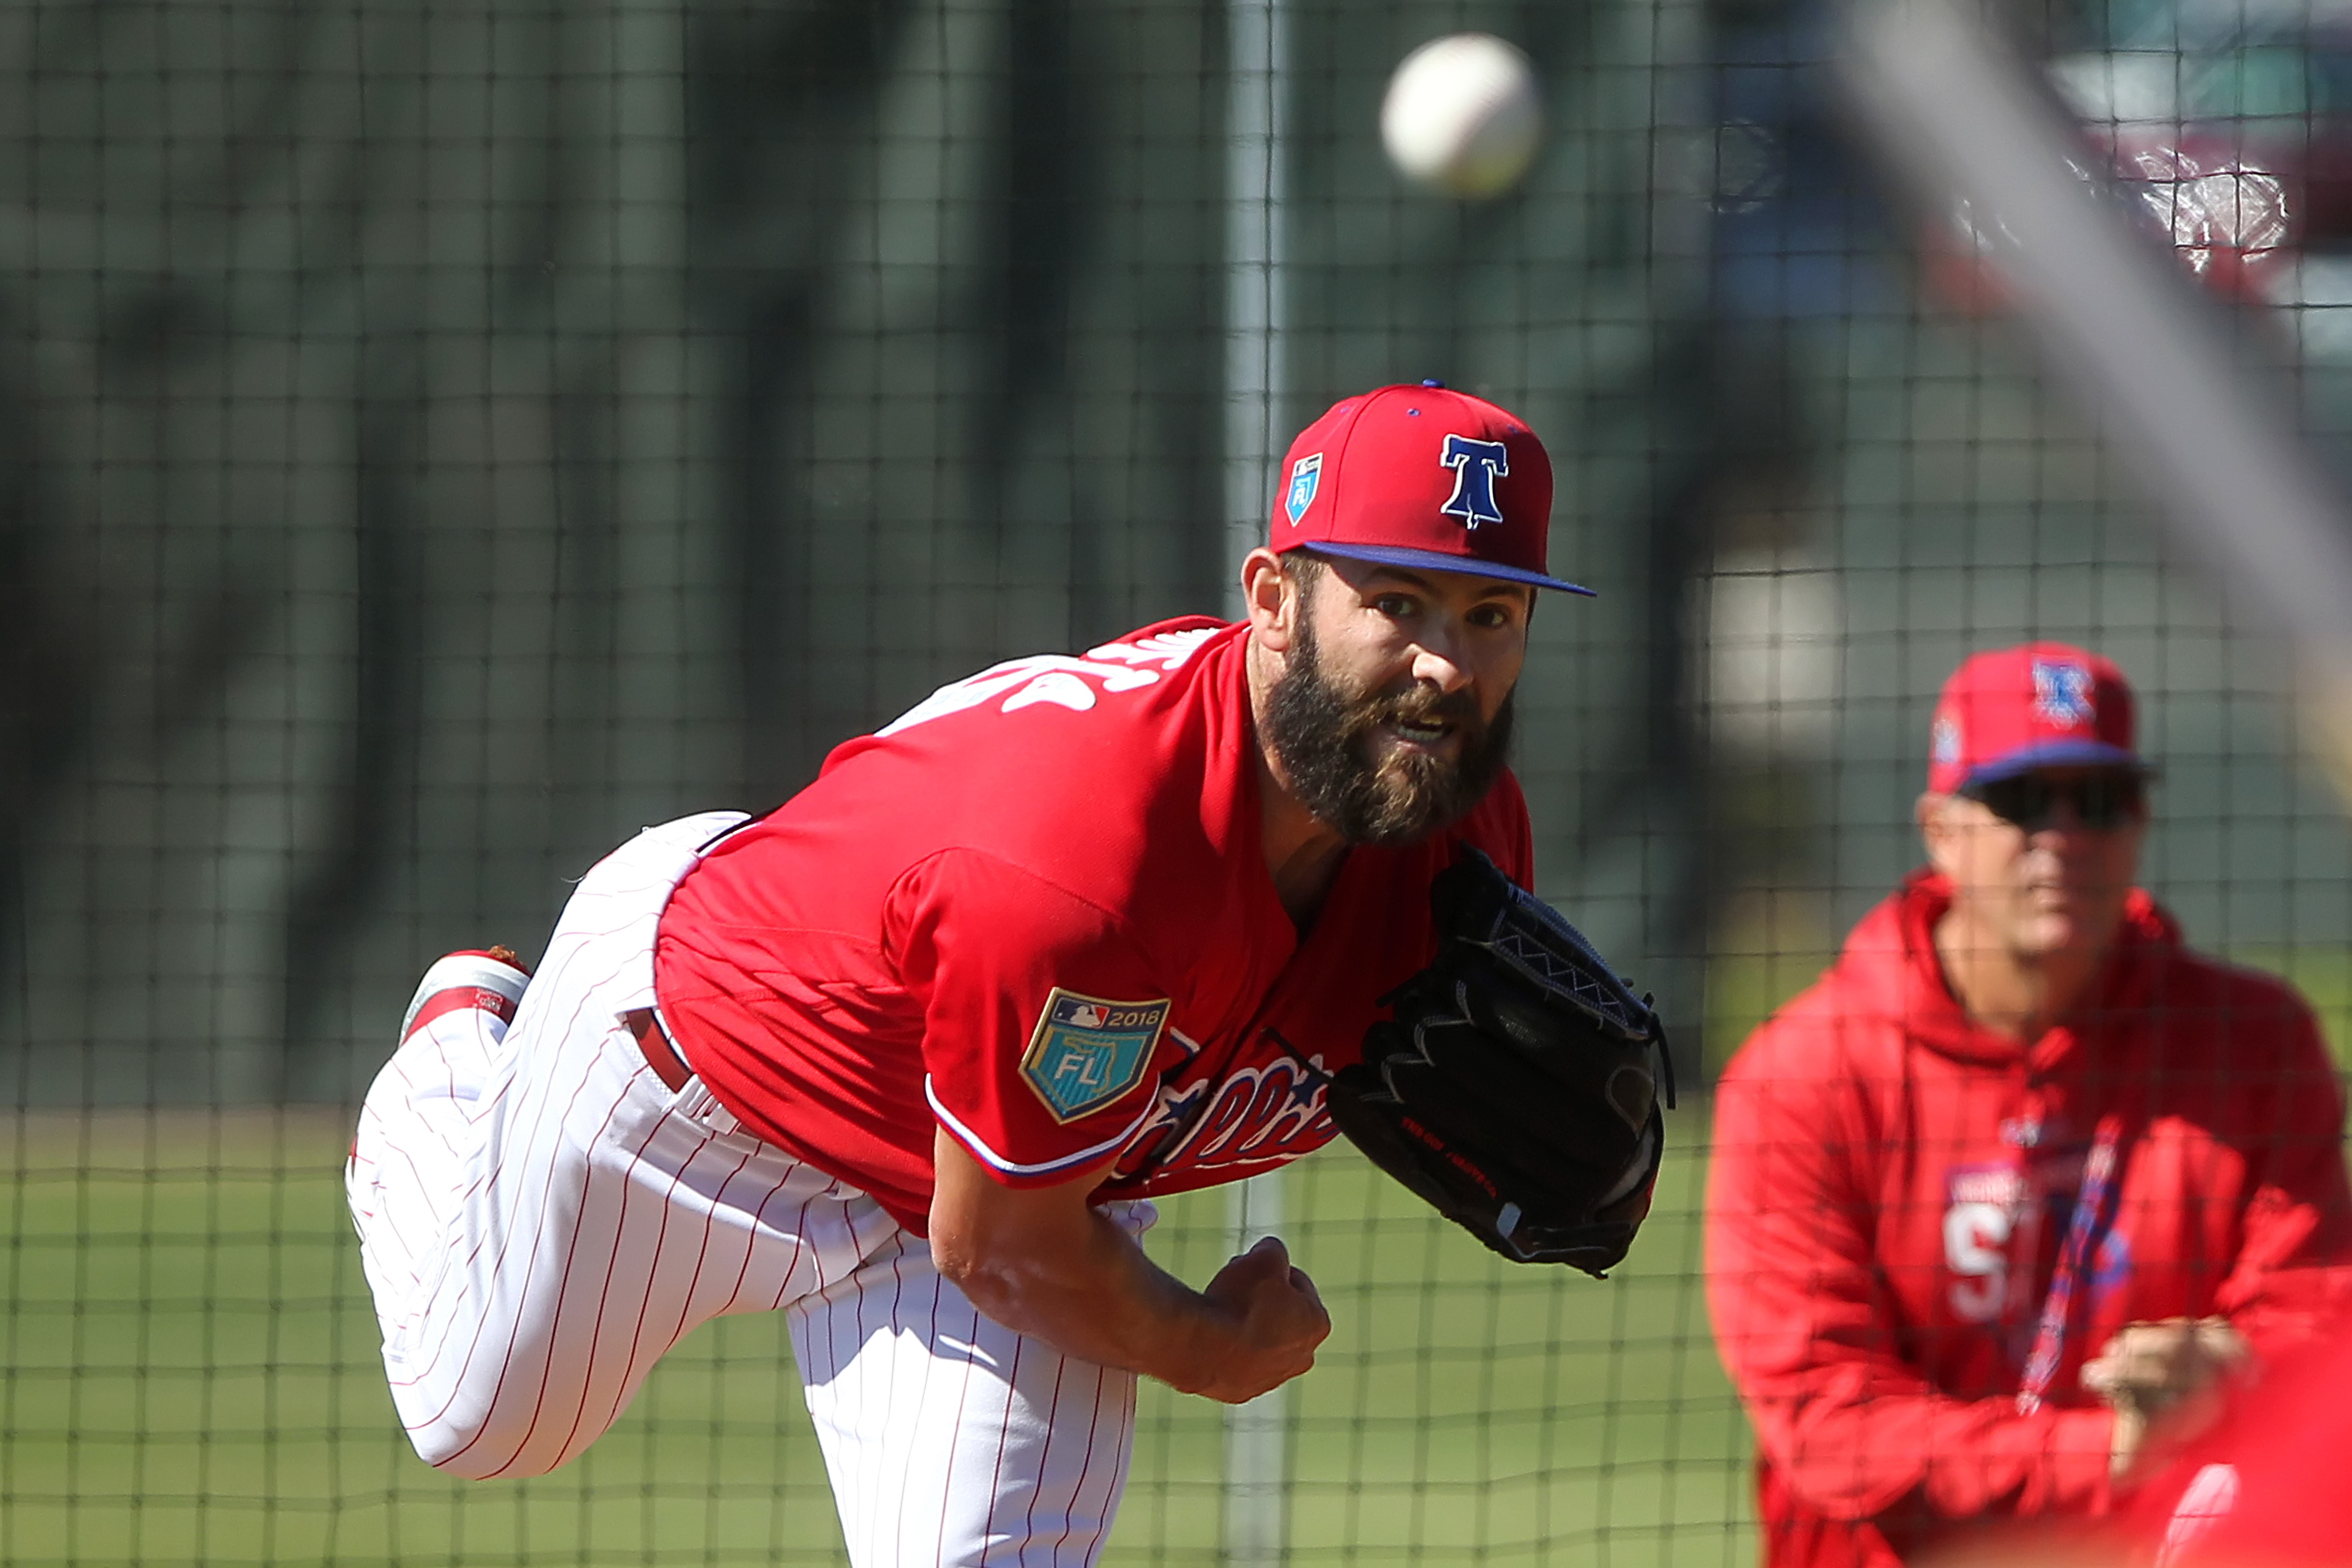 Phillies will face Jake Arrieta on Tuesday as the former Phillie is  pitching for his job with the Cubs